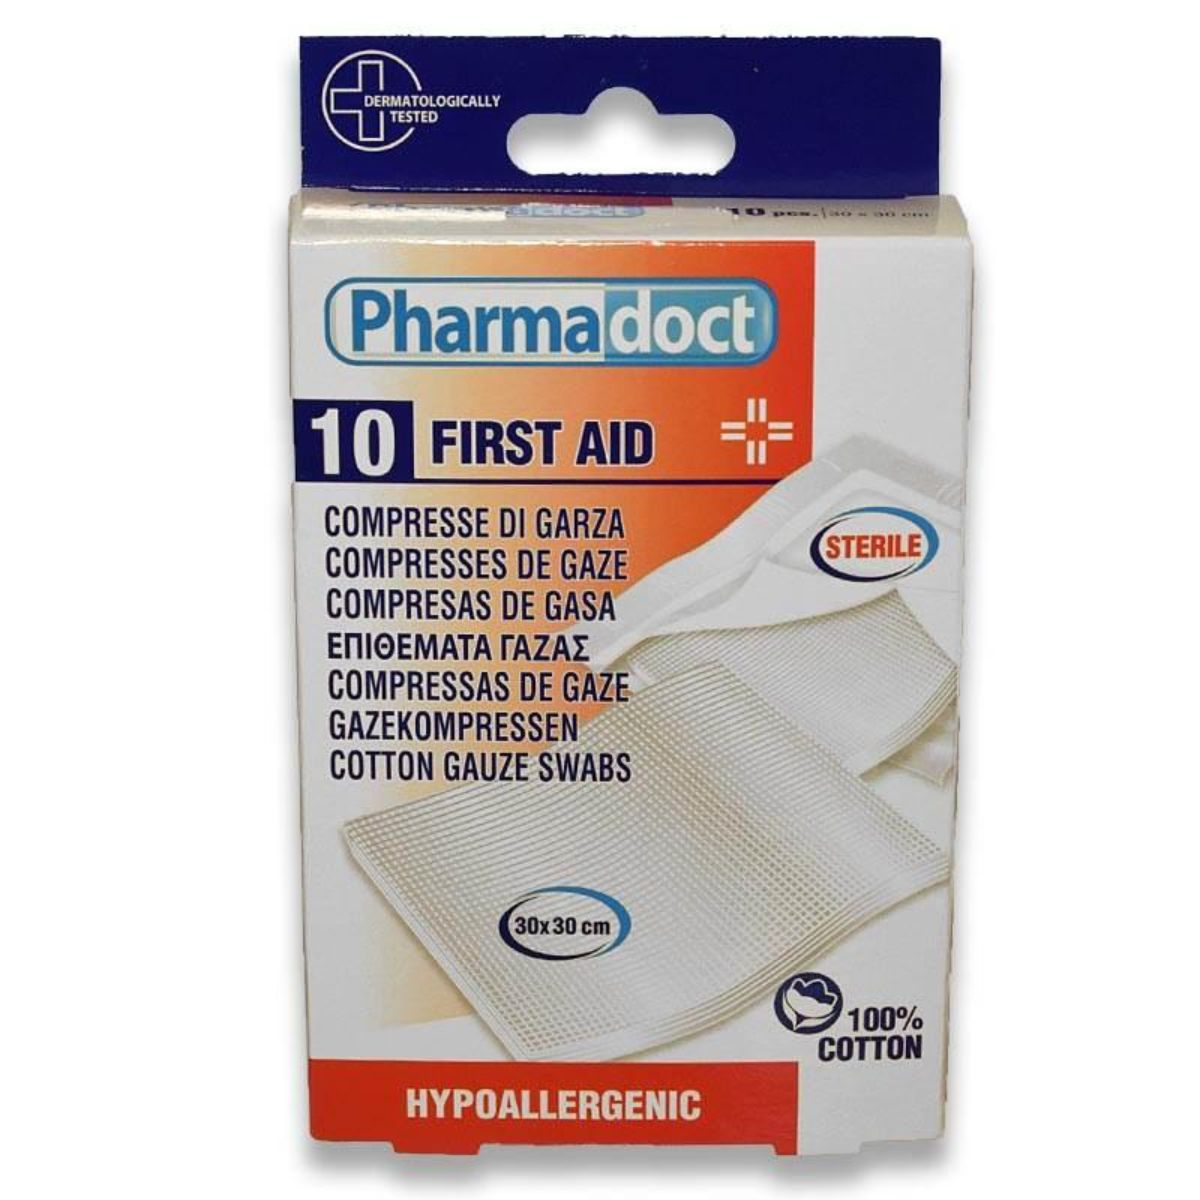 Comprese sterile din bumbac, Pharmadoct First Aid, 10 Buc 30 x 30 cm noriel.ro